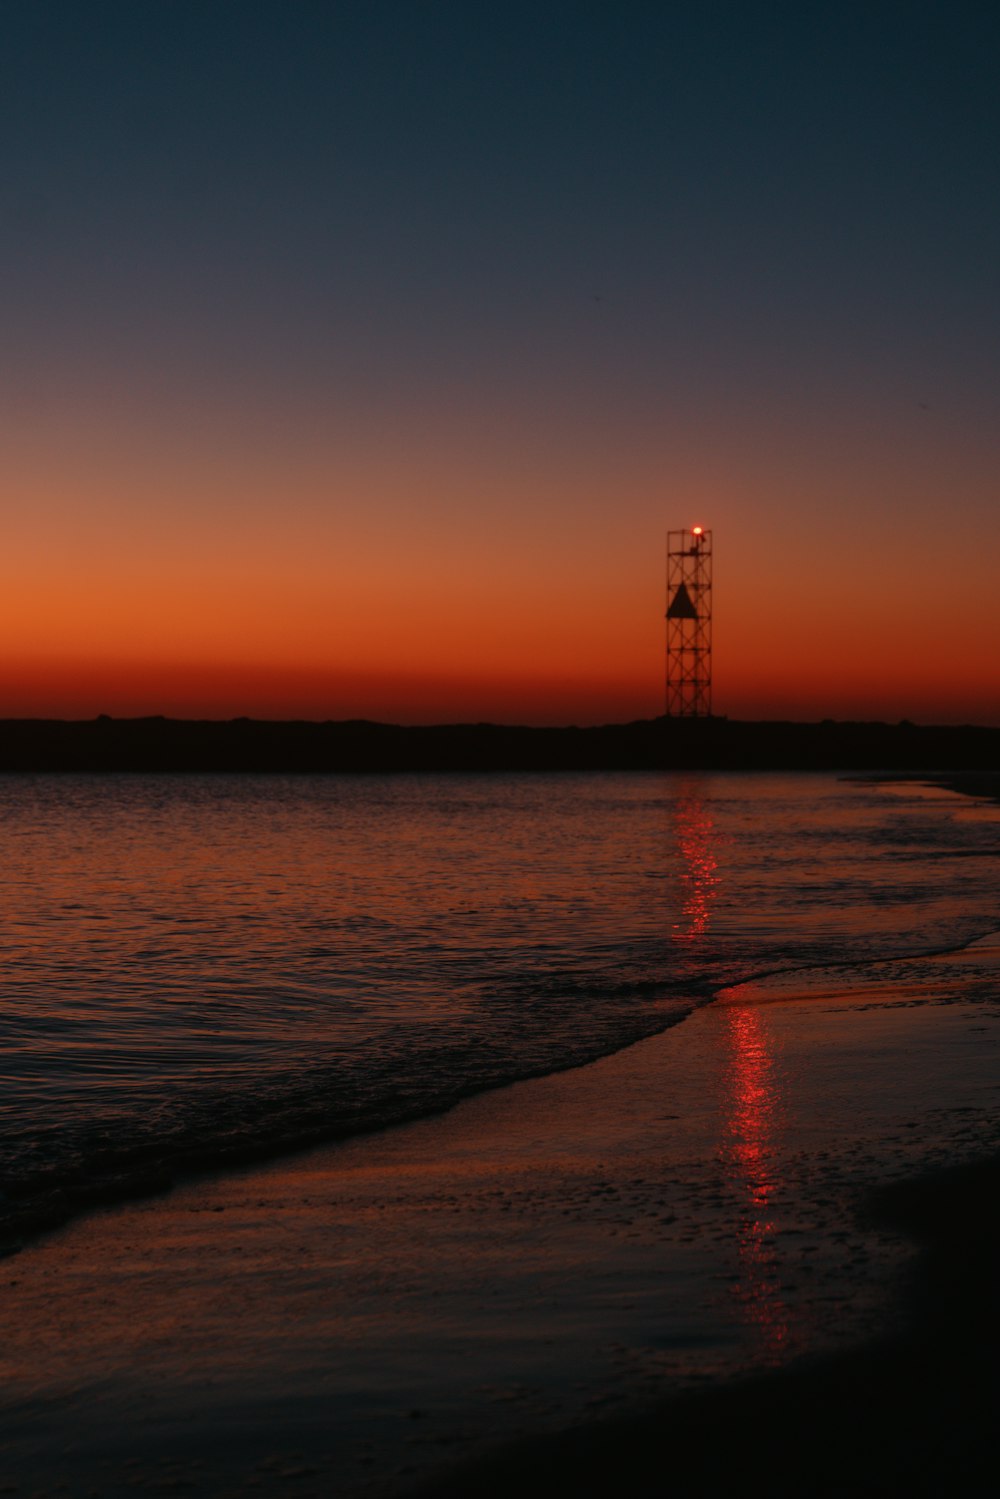 the sun is setting over the ocean with a light tower in the distance